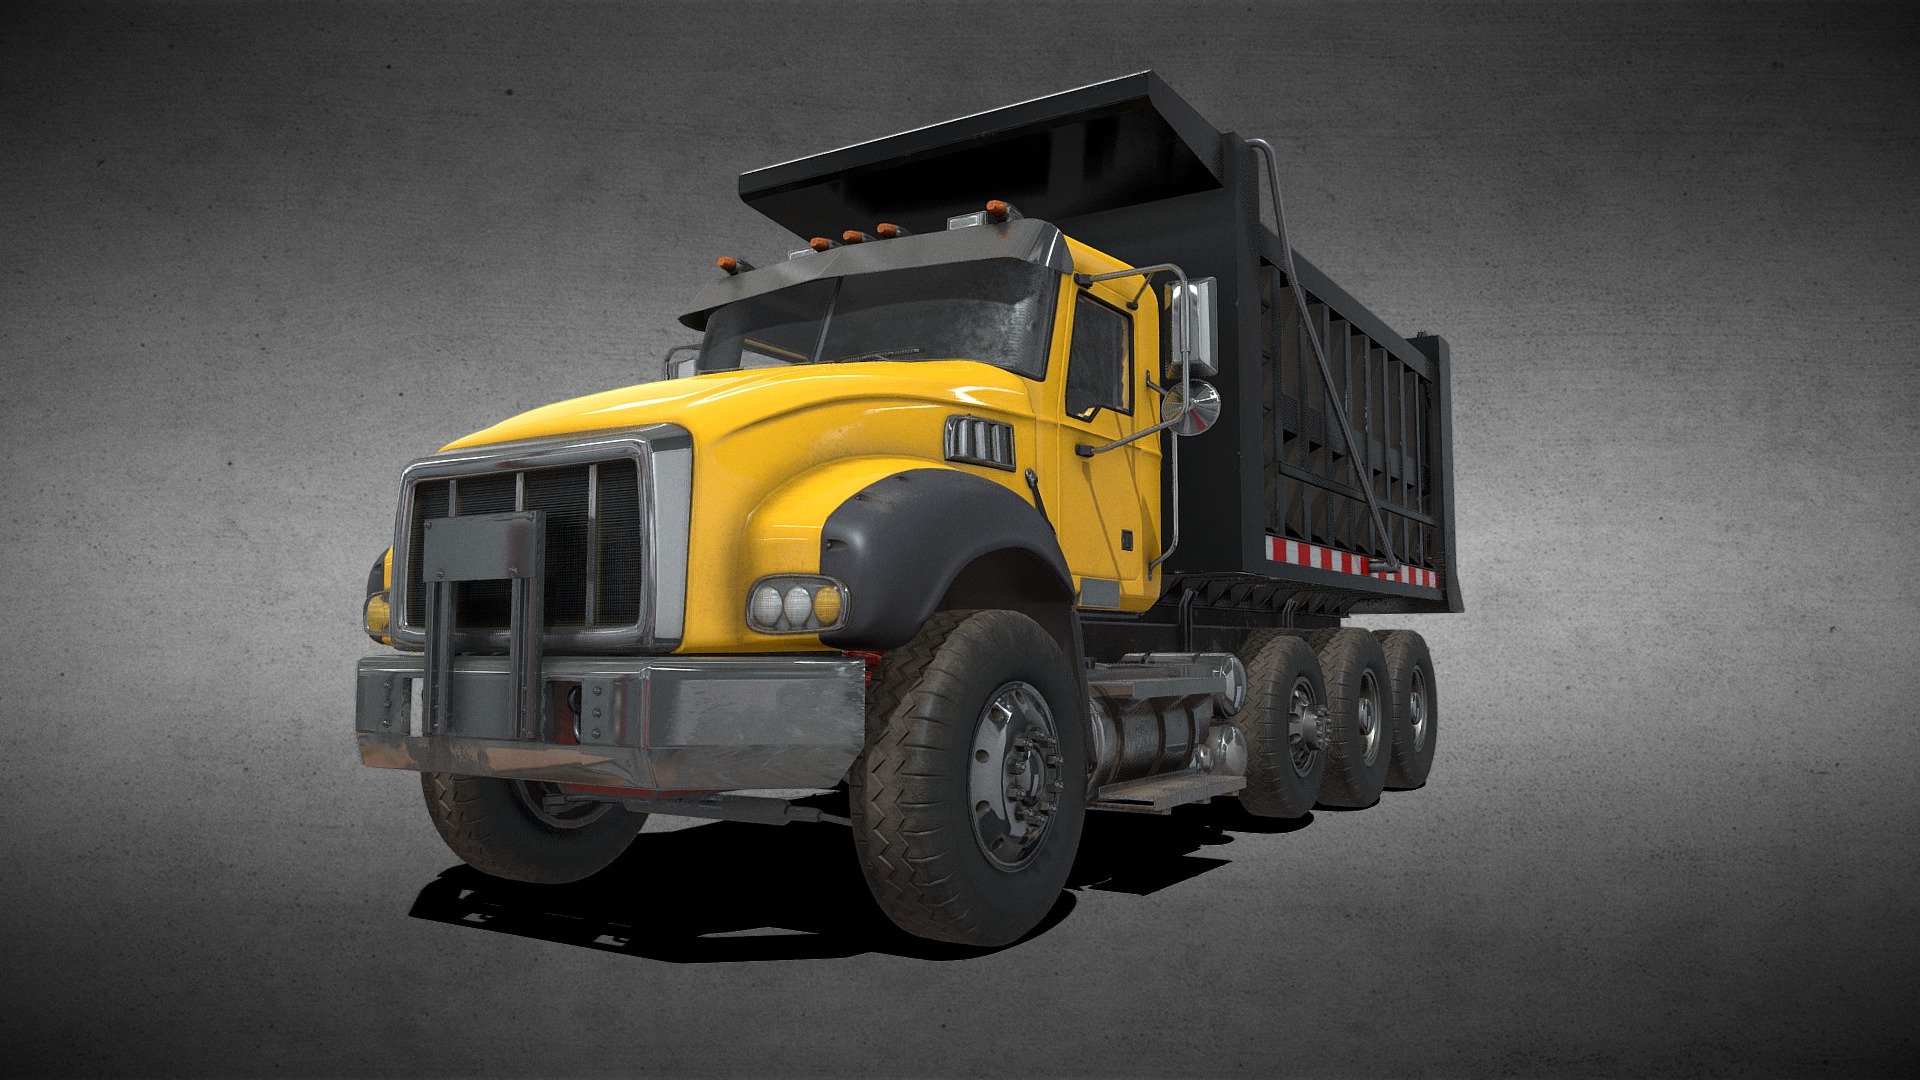 Dump Truck model made in maya

Contains UV'd model, skeleton with NO RIGGING. Cables should retain skinning. Textures in 2k and 4k

246808 tris

8 materials, 6 textures each

PBR textures: BaseColor, Normal, Height, Roughness, Metal, AO

tiff format with alphas where needed on the exhaust pipe, and the cab windows

Unreal

8 materials, 3 textures each: BaseColor, Normal, Packed (Occlusion, Roughness, Metallic) - Dump Truck - Buy Royalty Free 3D model by Phil Rivera (@philrivera) 3d model